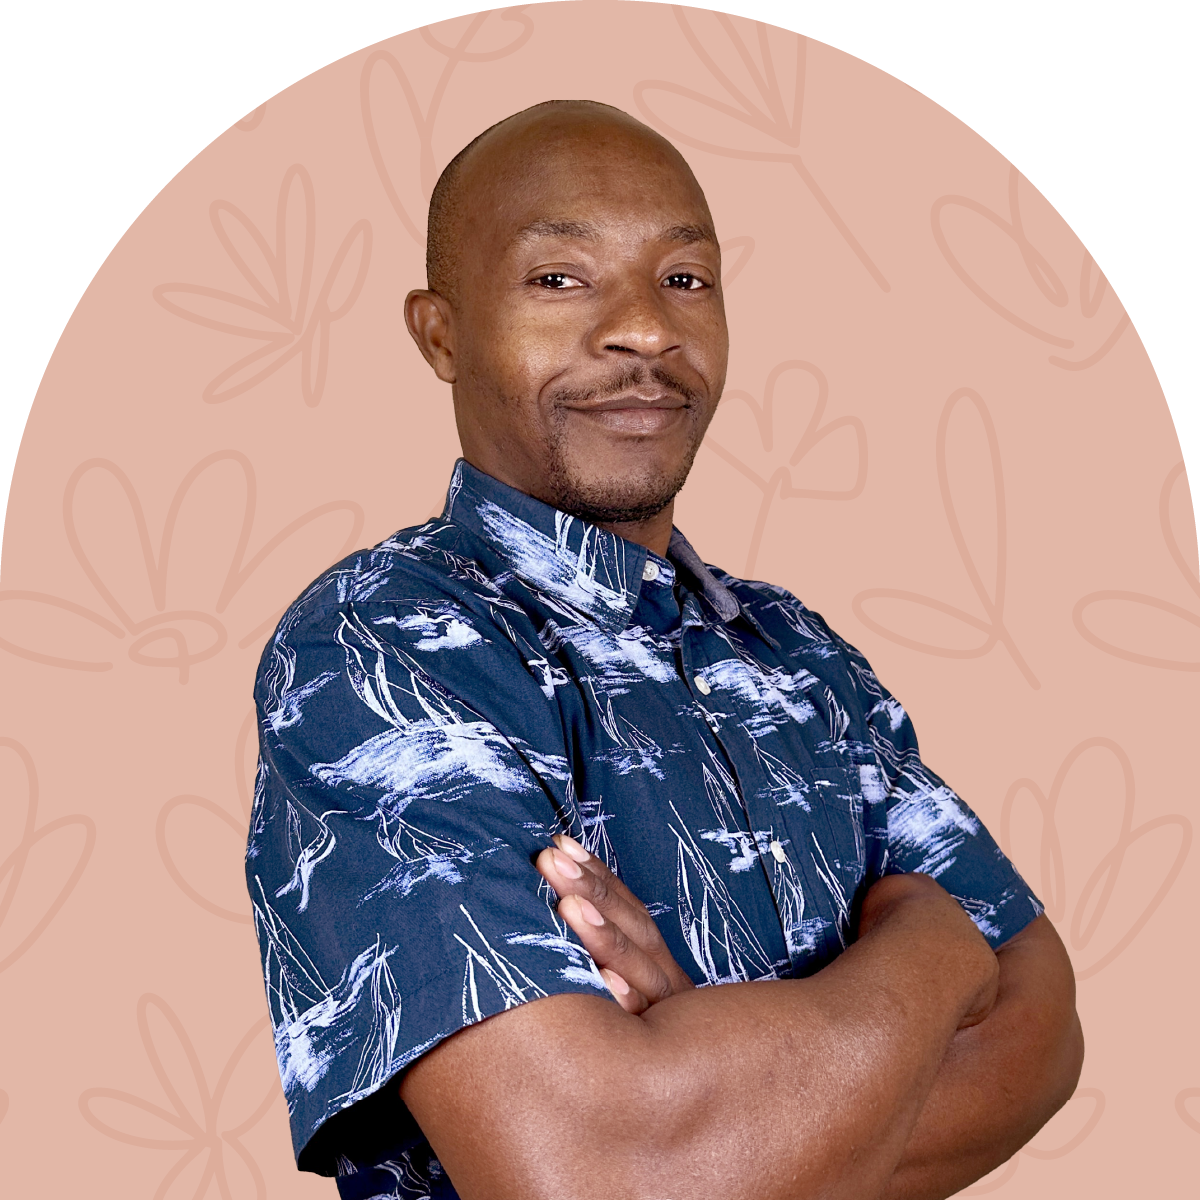 Portrait of Elias, a team member at Fabulous Flowers, wearing a navy patterned shirt against a beige background. MEET THE TEAM at Fabulous Flowers and Gifts.